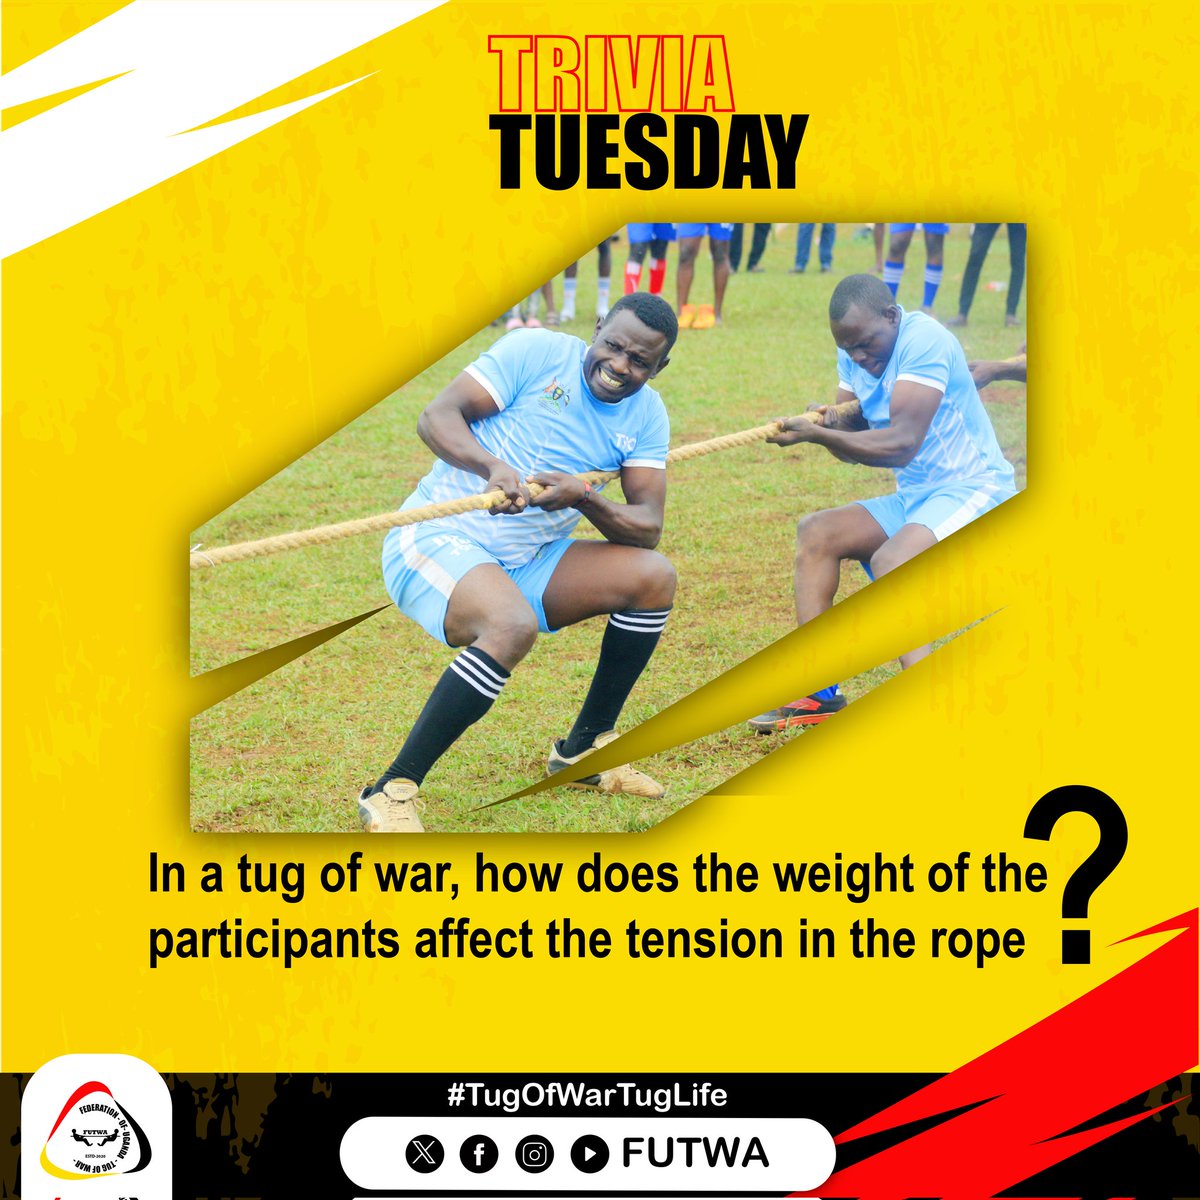 #TriviaTuesdays
(a) It incereases tension in a rope
(b) It reduces tension in a rope 
(c) it has no effect on the tension
(d) It makes the tension unstable